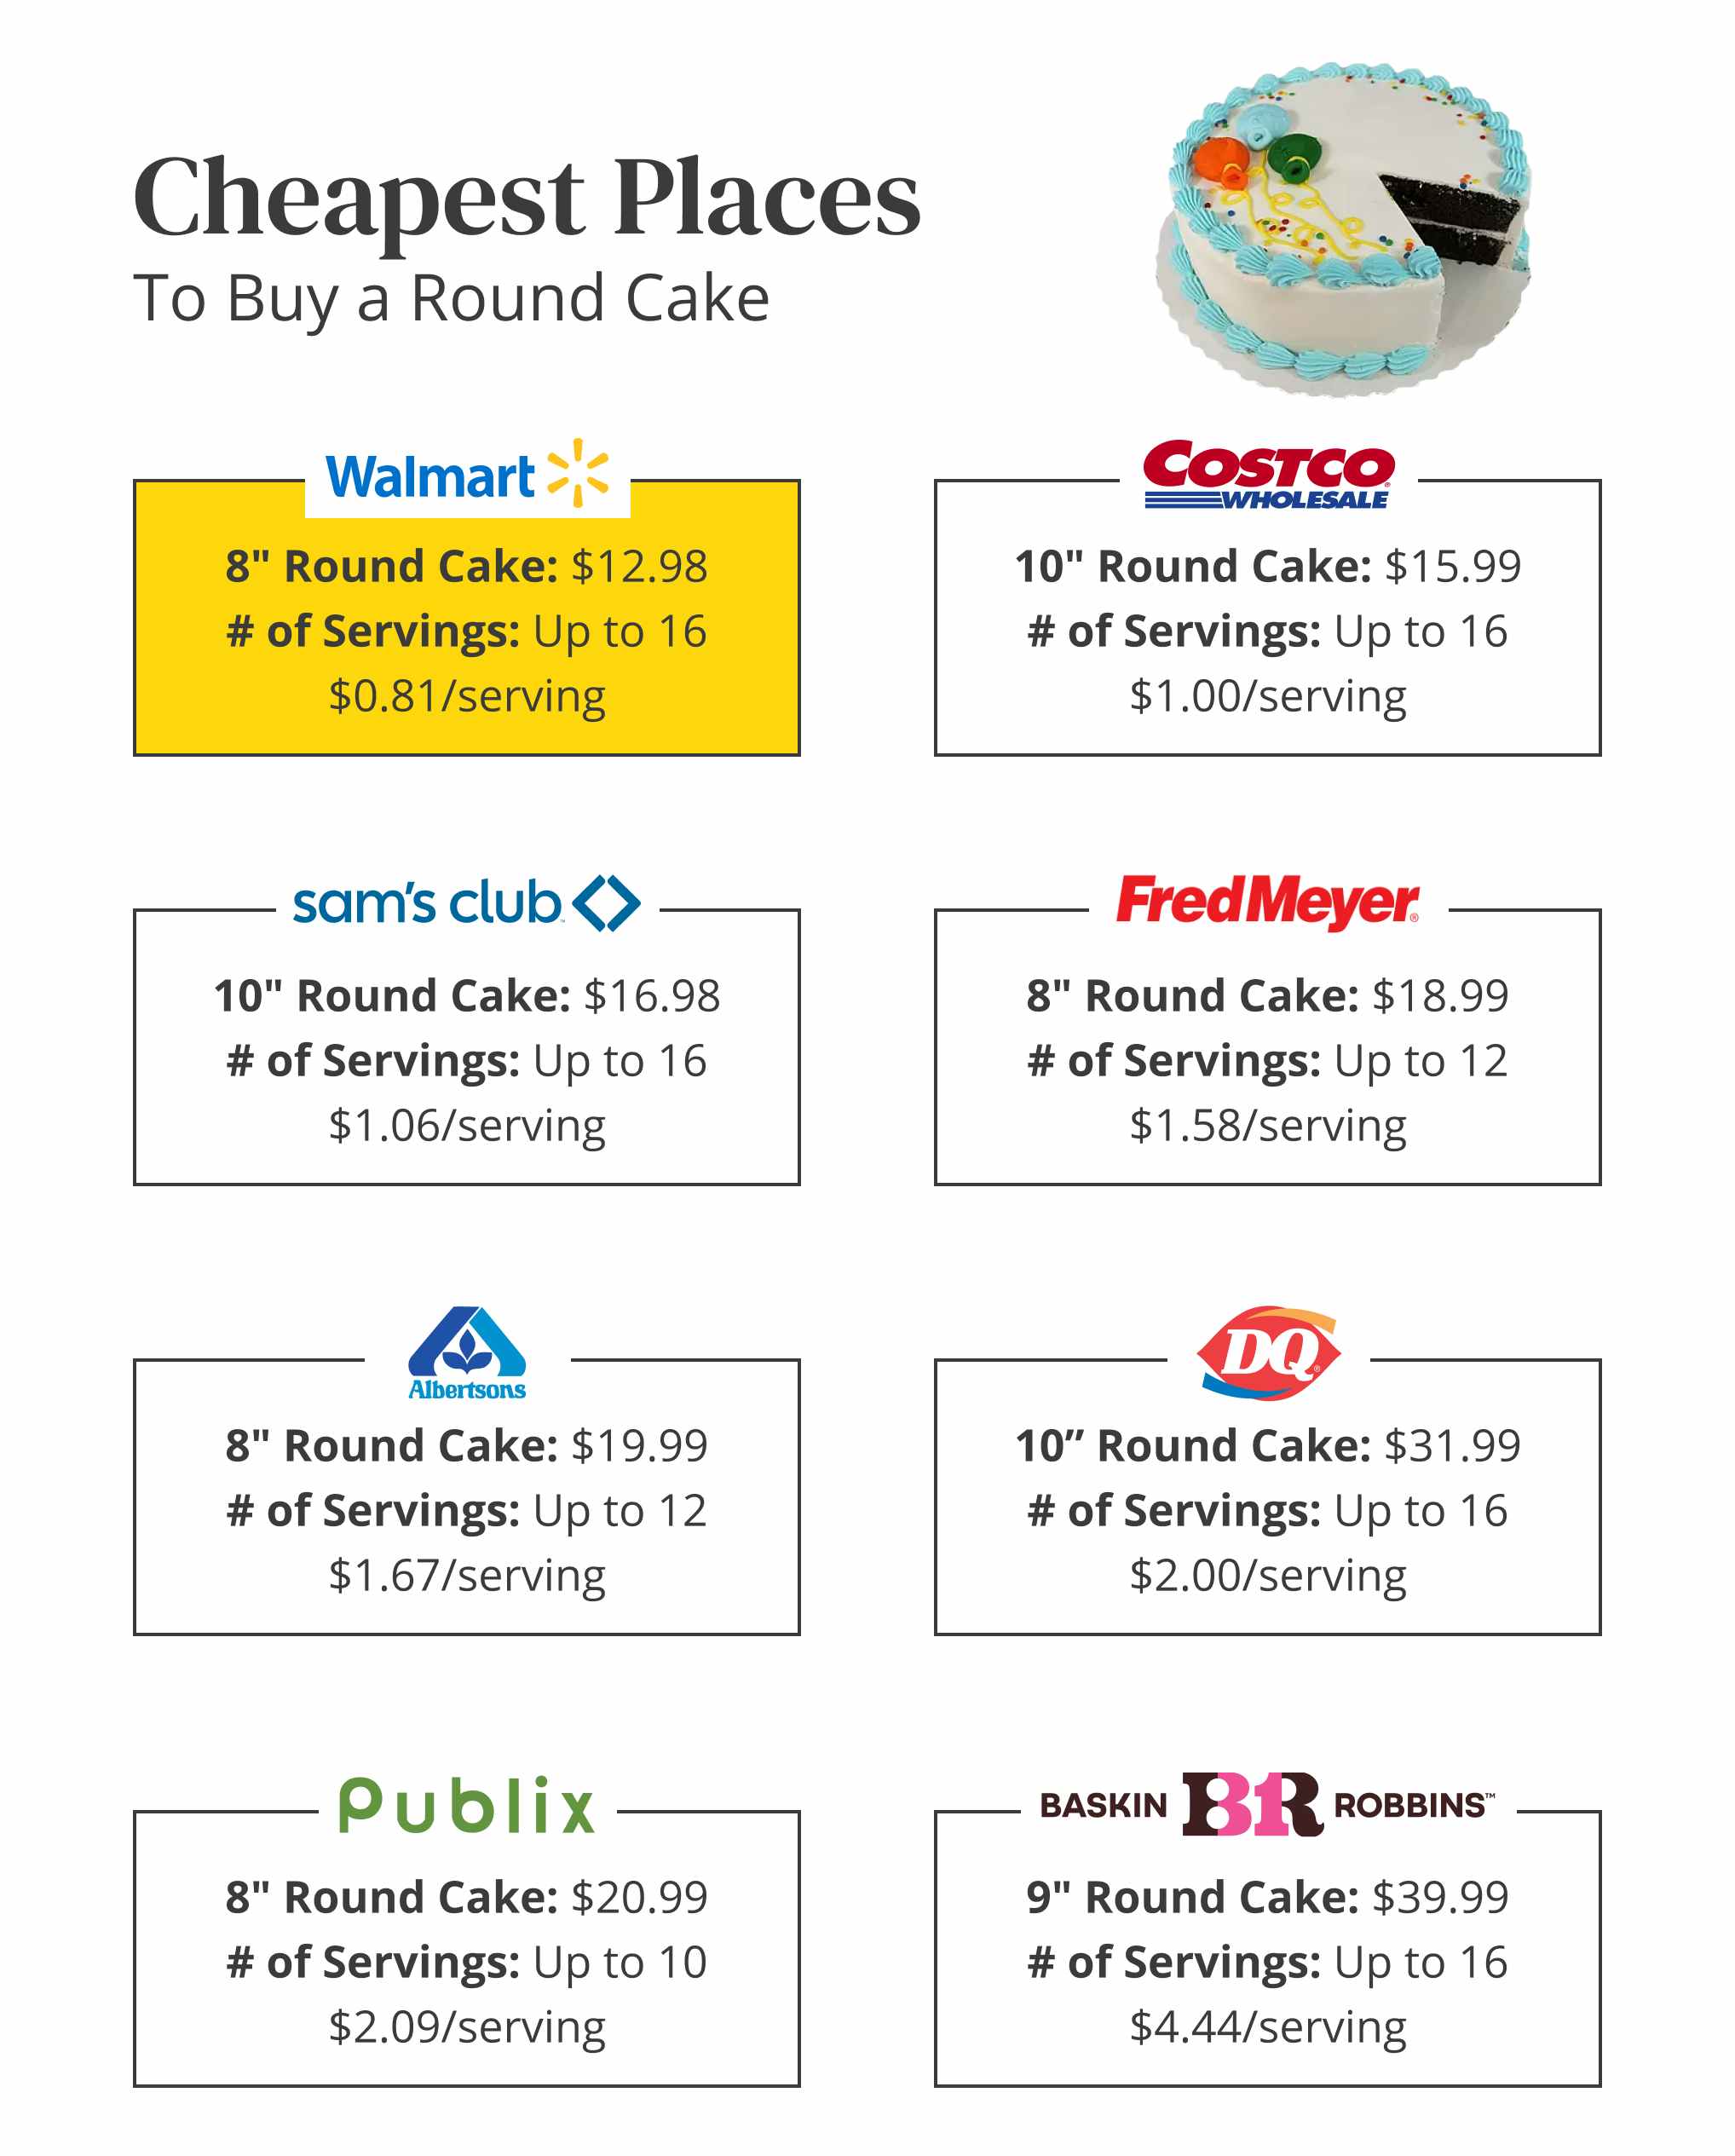 Graphic showing the Walmart is the cheapest places to buy a round cake based on price per serving.